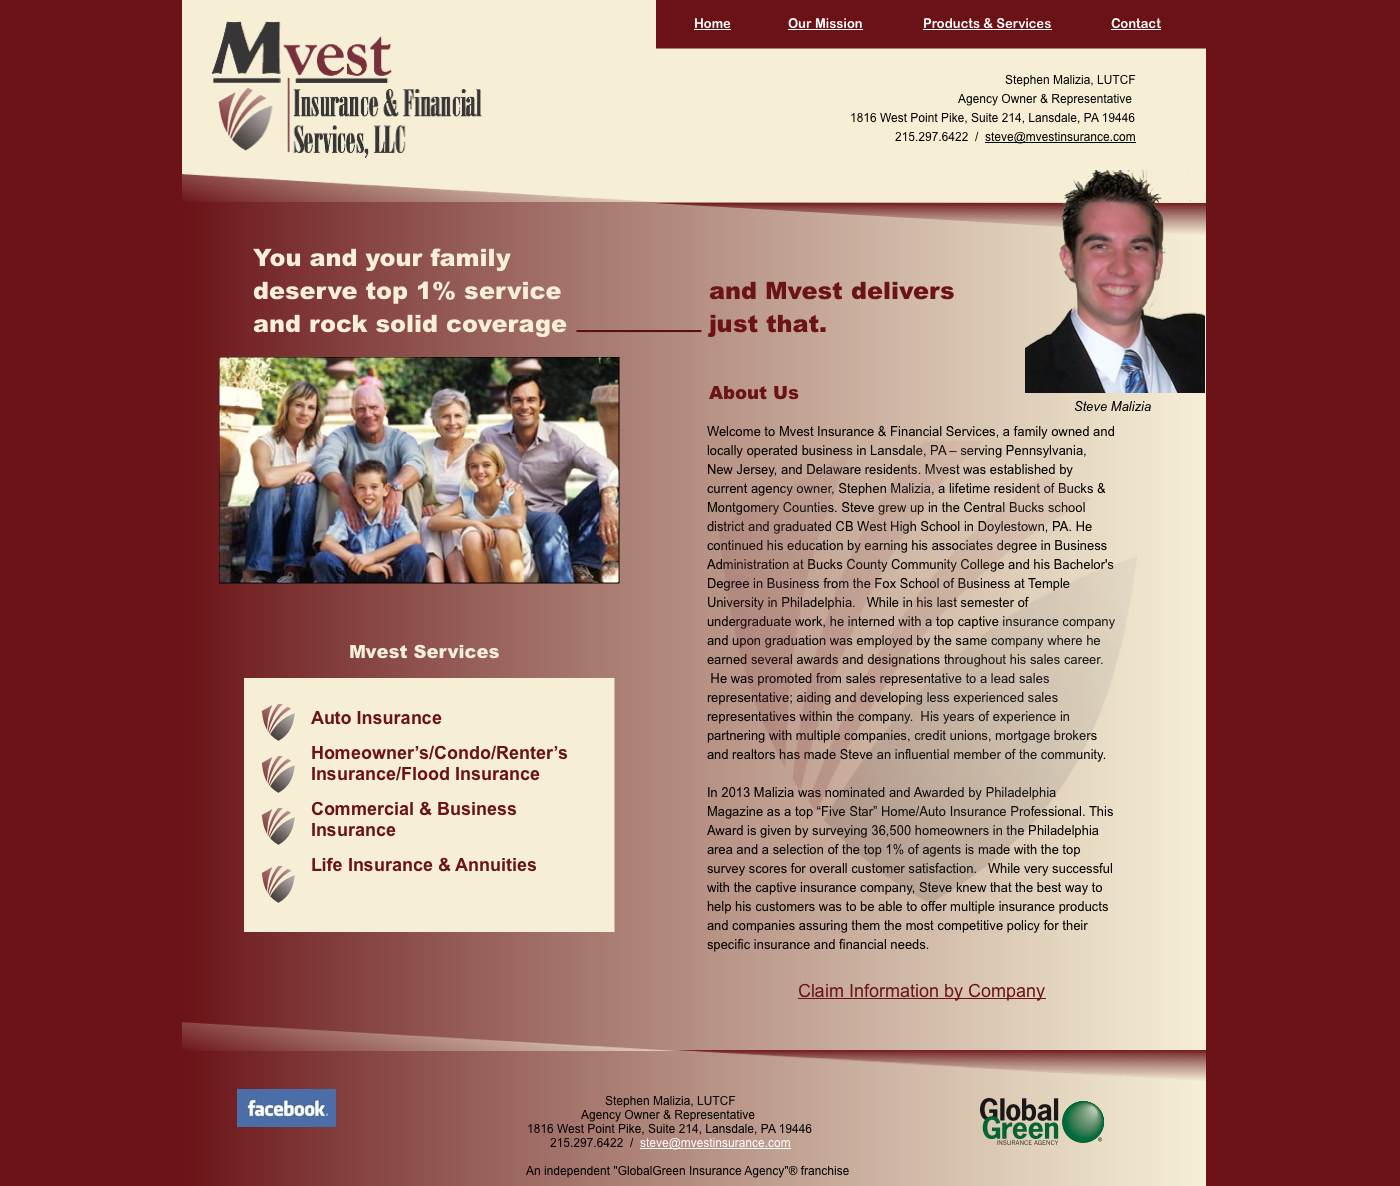 mVest Financial Services